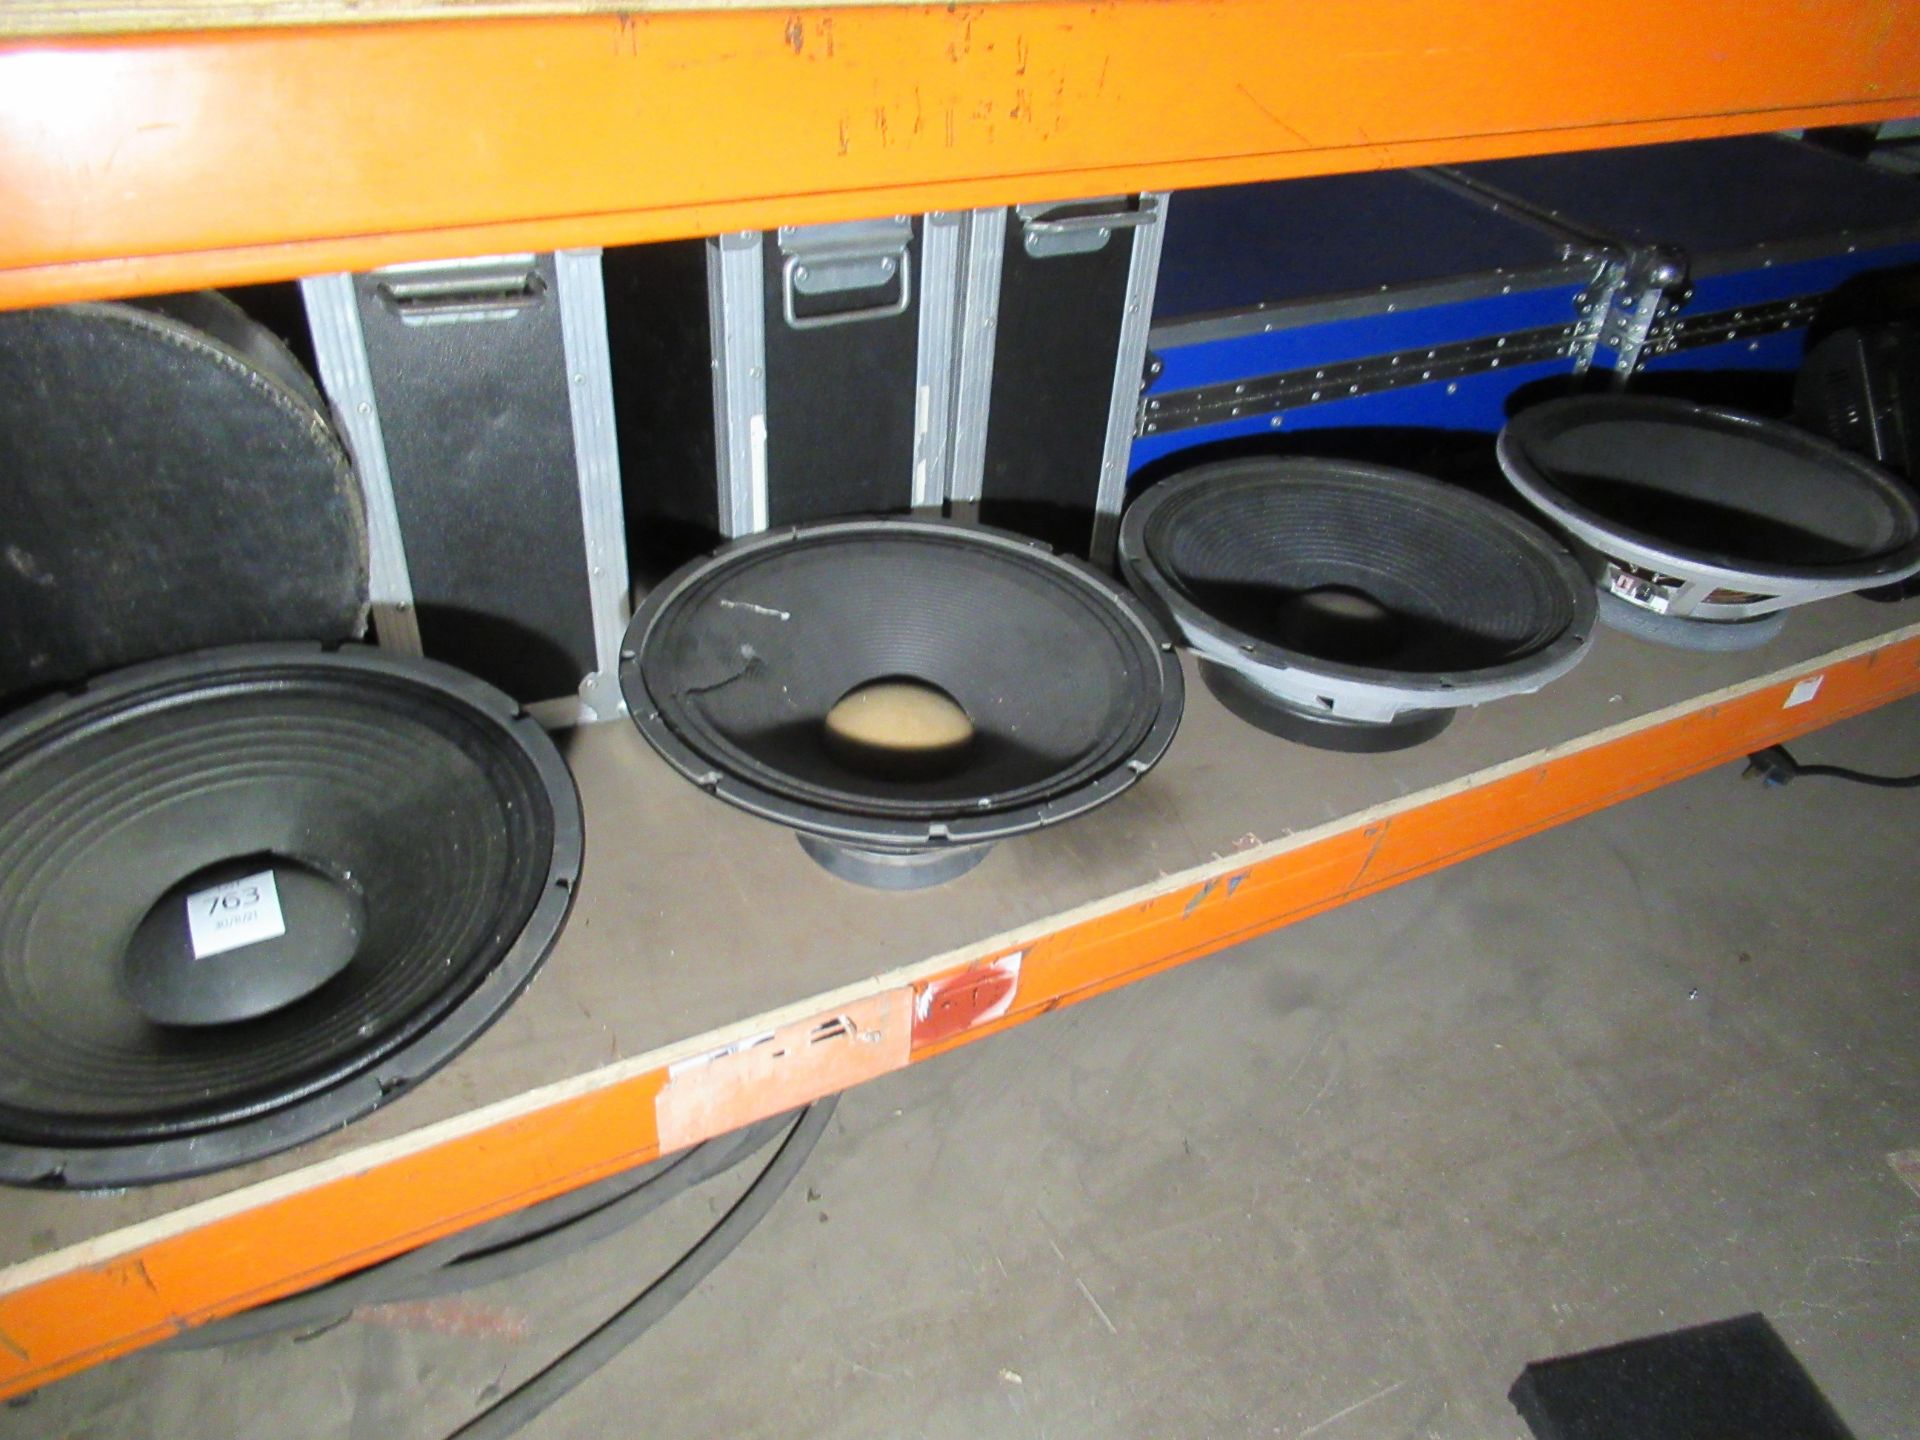 4 x Speaker cones by JBL, Beymall and Peavey (one unbranded)